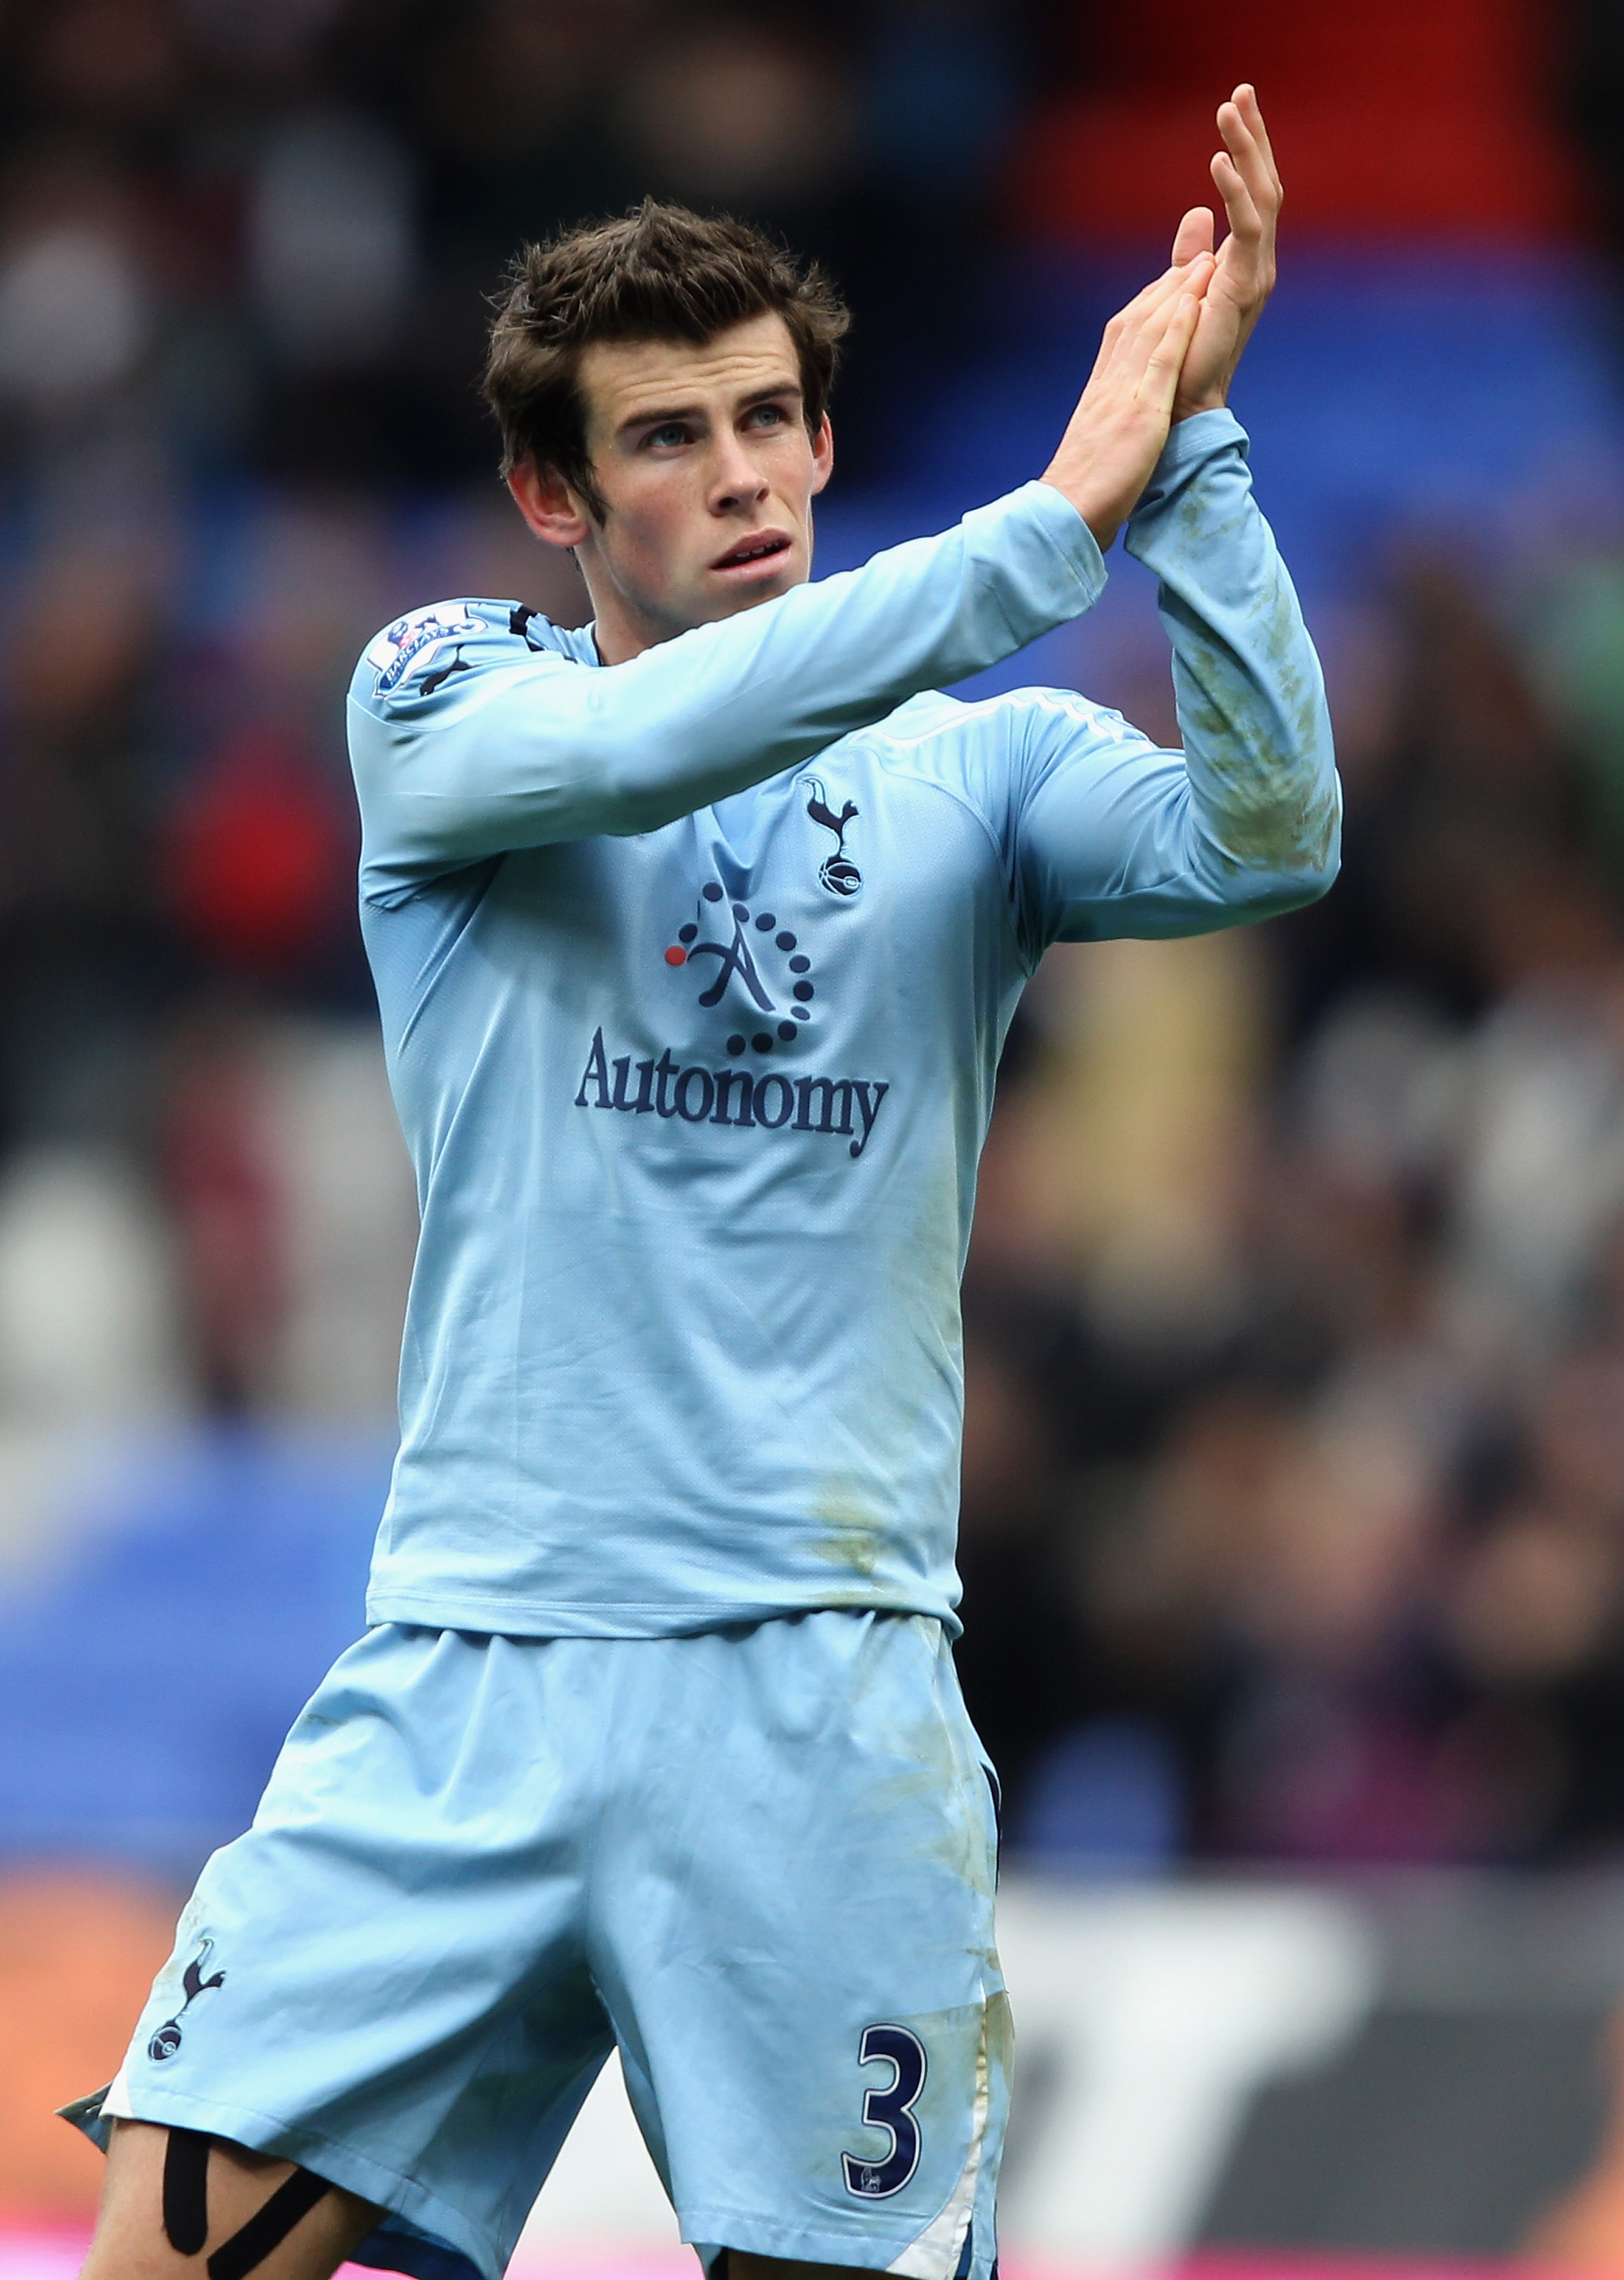 BOLTON, ENGLAND - NOVEMBER 06:  Gareth Bale of Tottenham Hotspur waves to the crowd after the Barclays Premier League match between Bolton Wanderers and Tottenham Hotspur at the Reebok Stadium on November 6, 2010 in Bolton, England.  (Photo by Clive Bruns